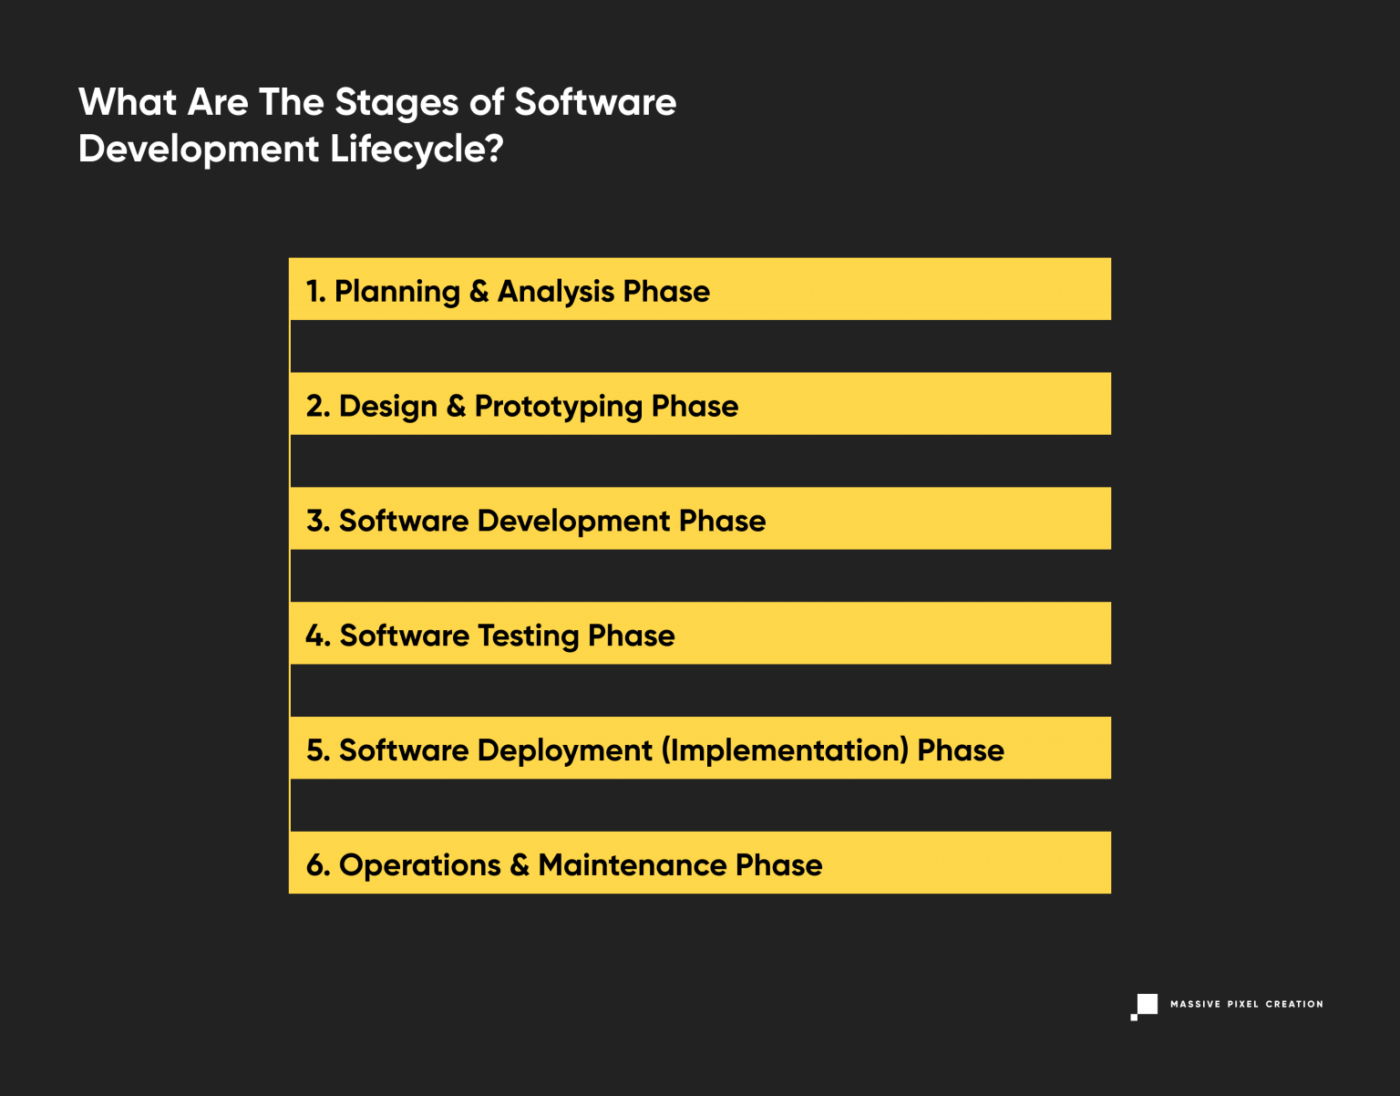 SoftwareDevelopmentLifecycle_stages-1536x1202